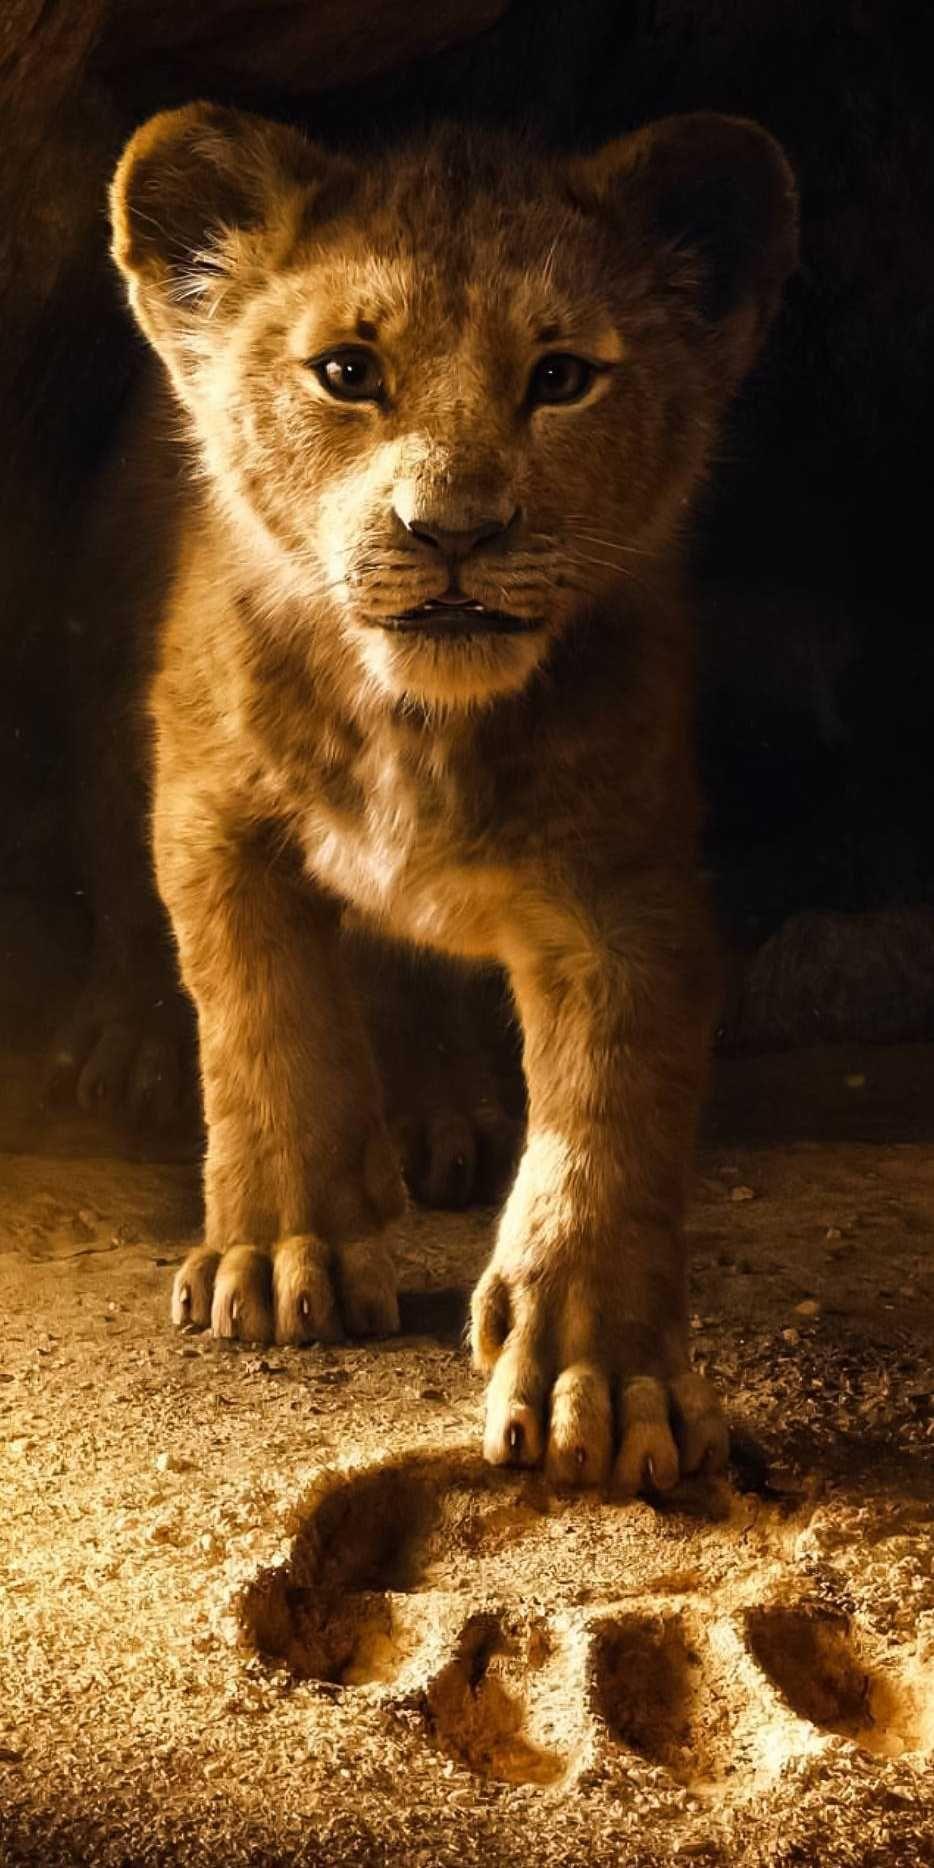 The Lion King iPhone Wallpaper. Lion king movie, Lion picture